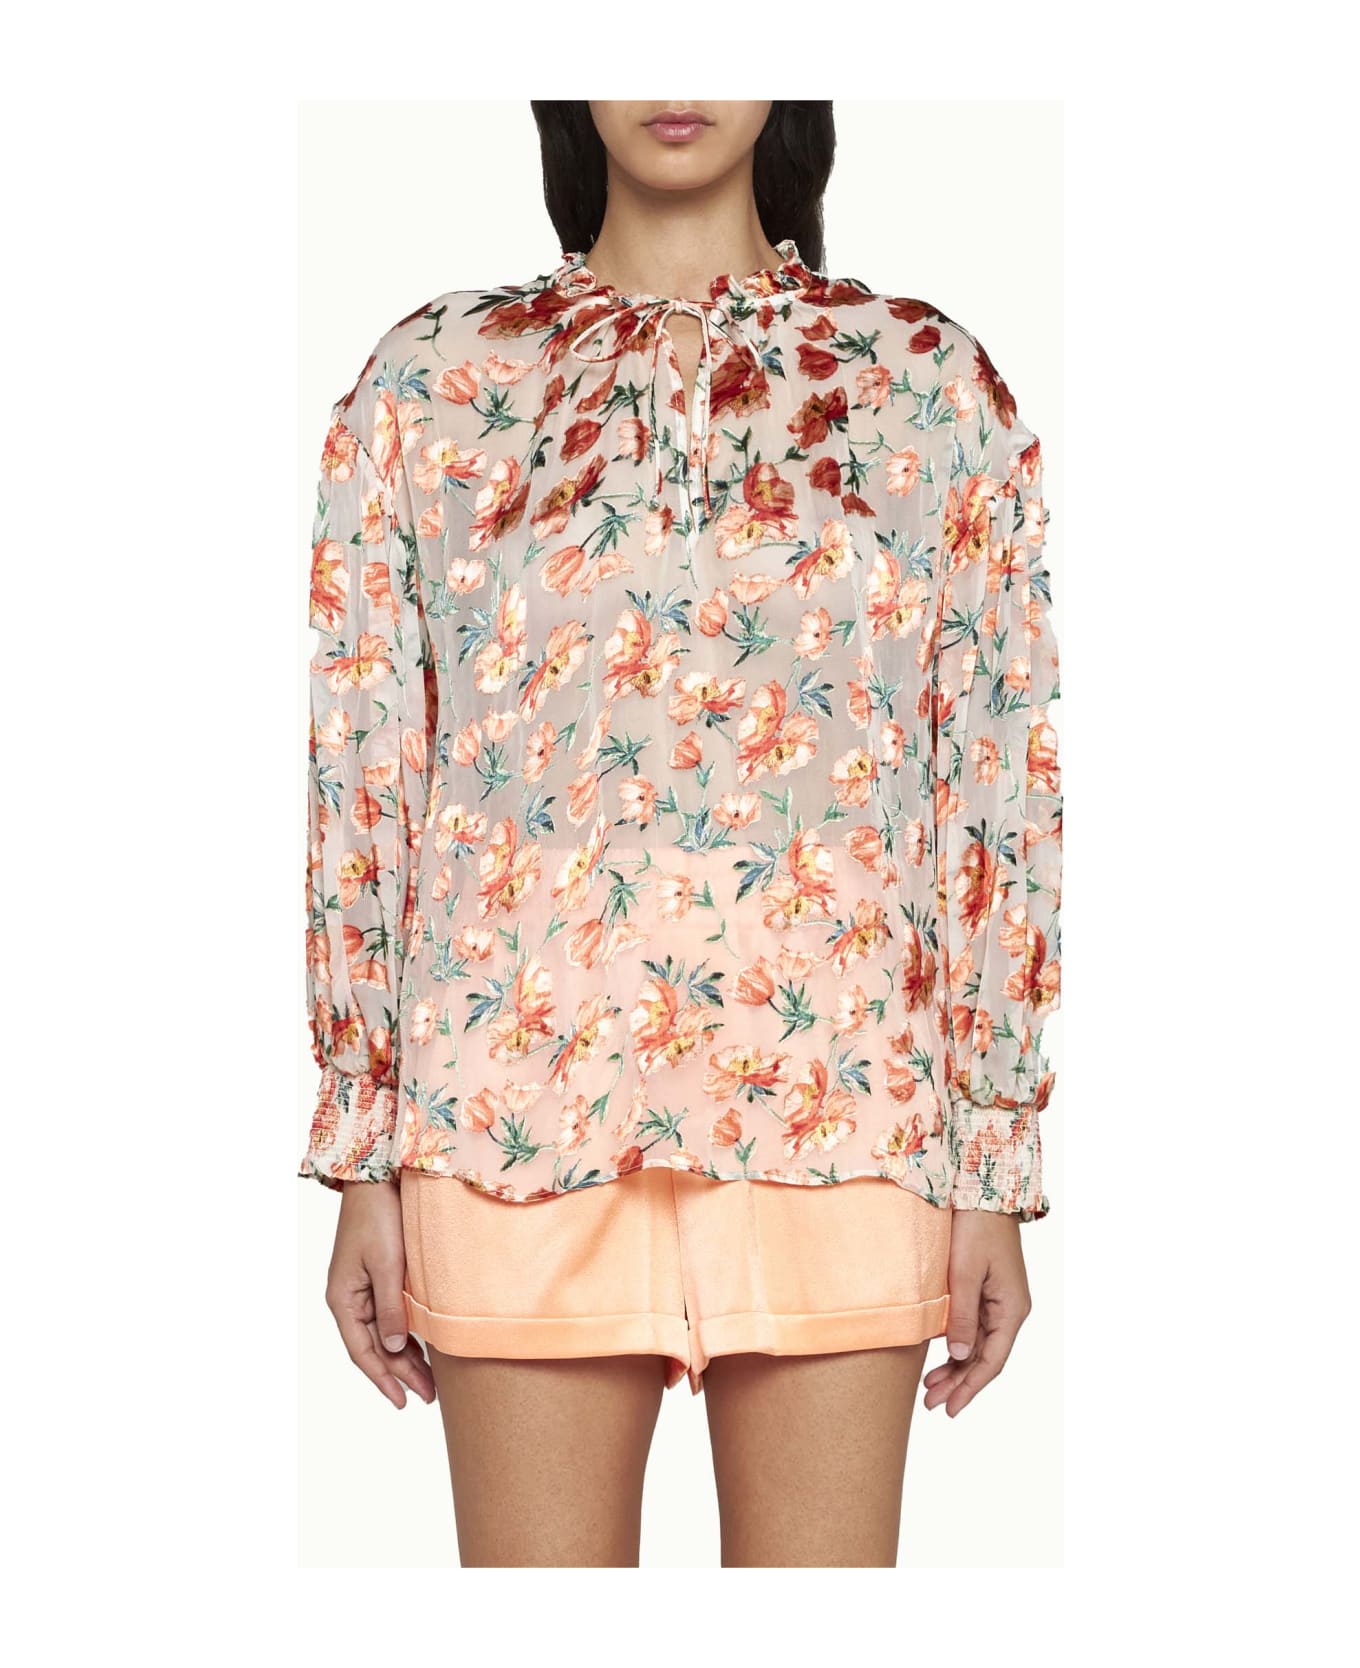 Alice + Olivia Shirt - Falling for you off white ブラウス